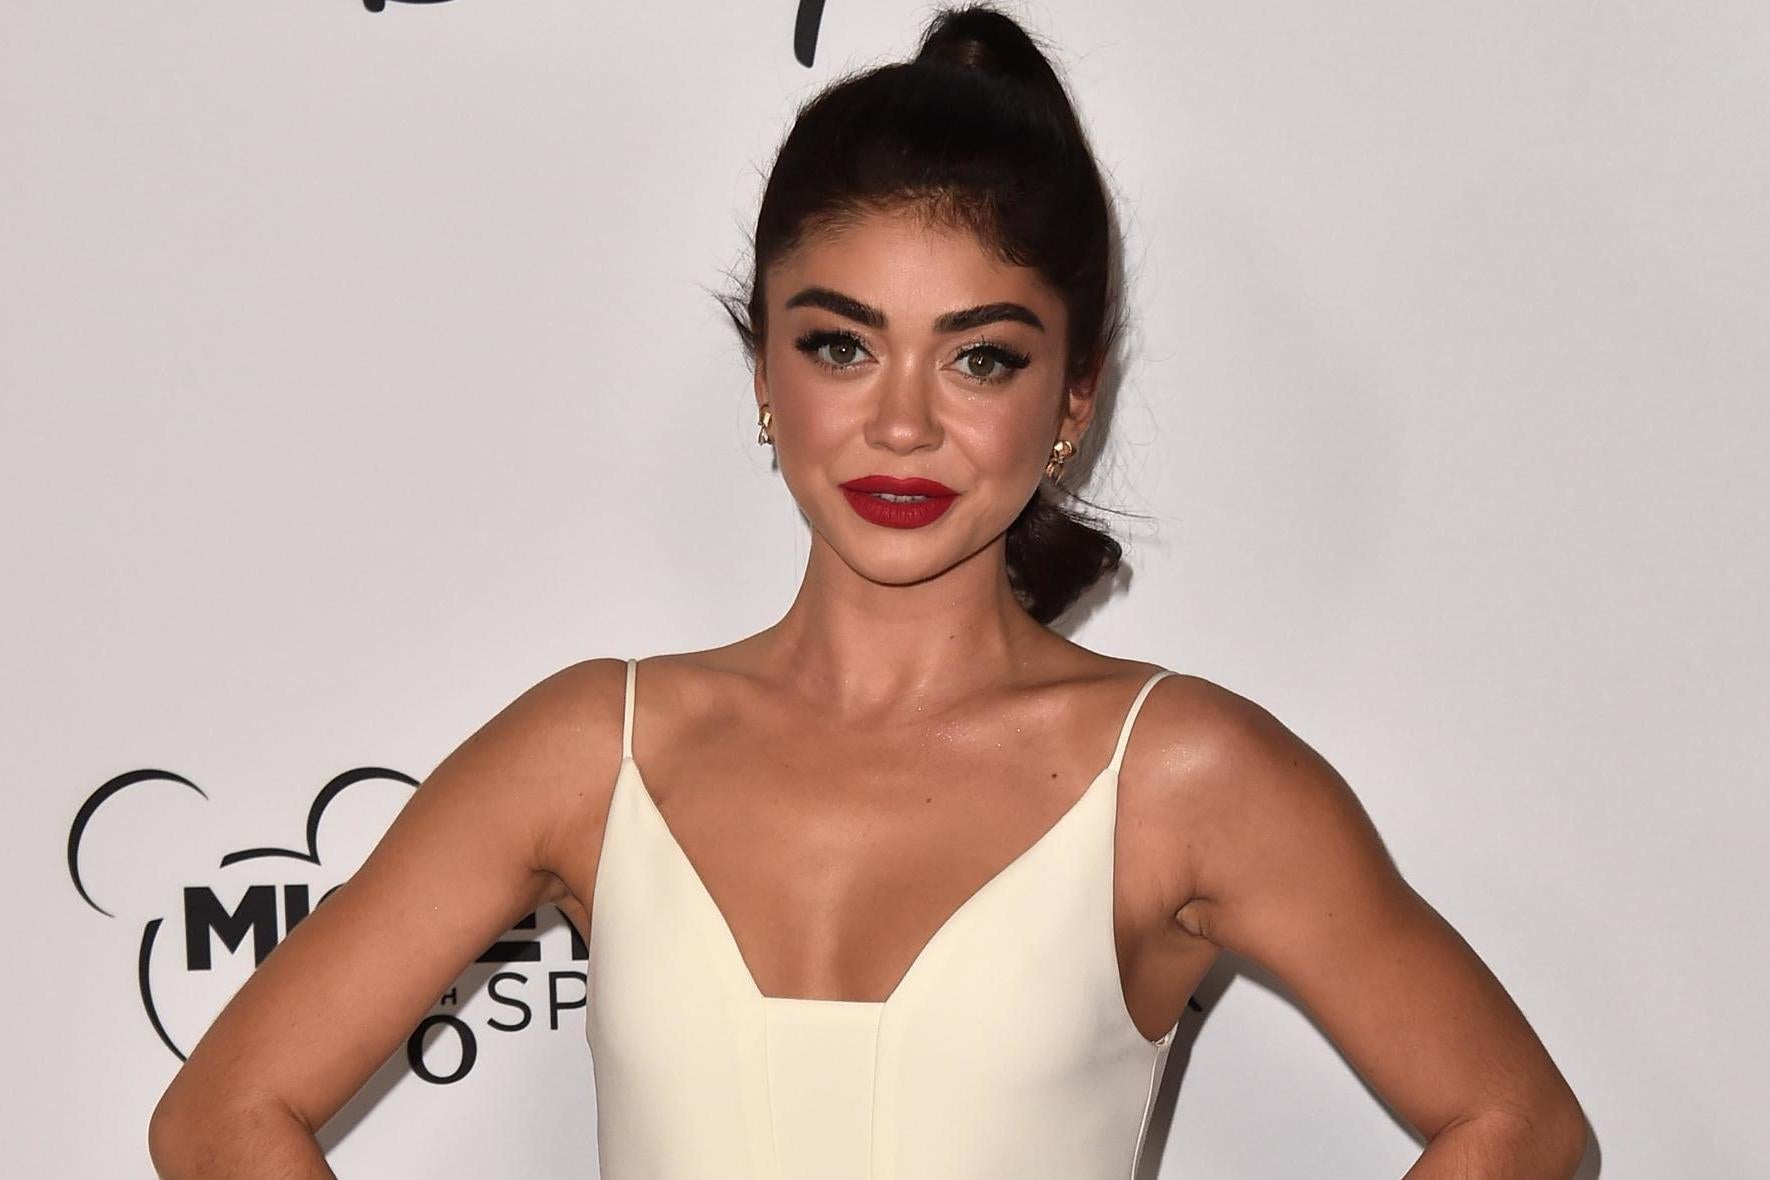 Sarah Hyland Groped by Fan At 'Modern Family' Event